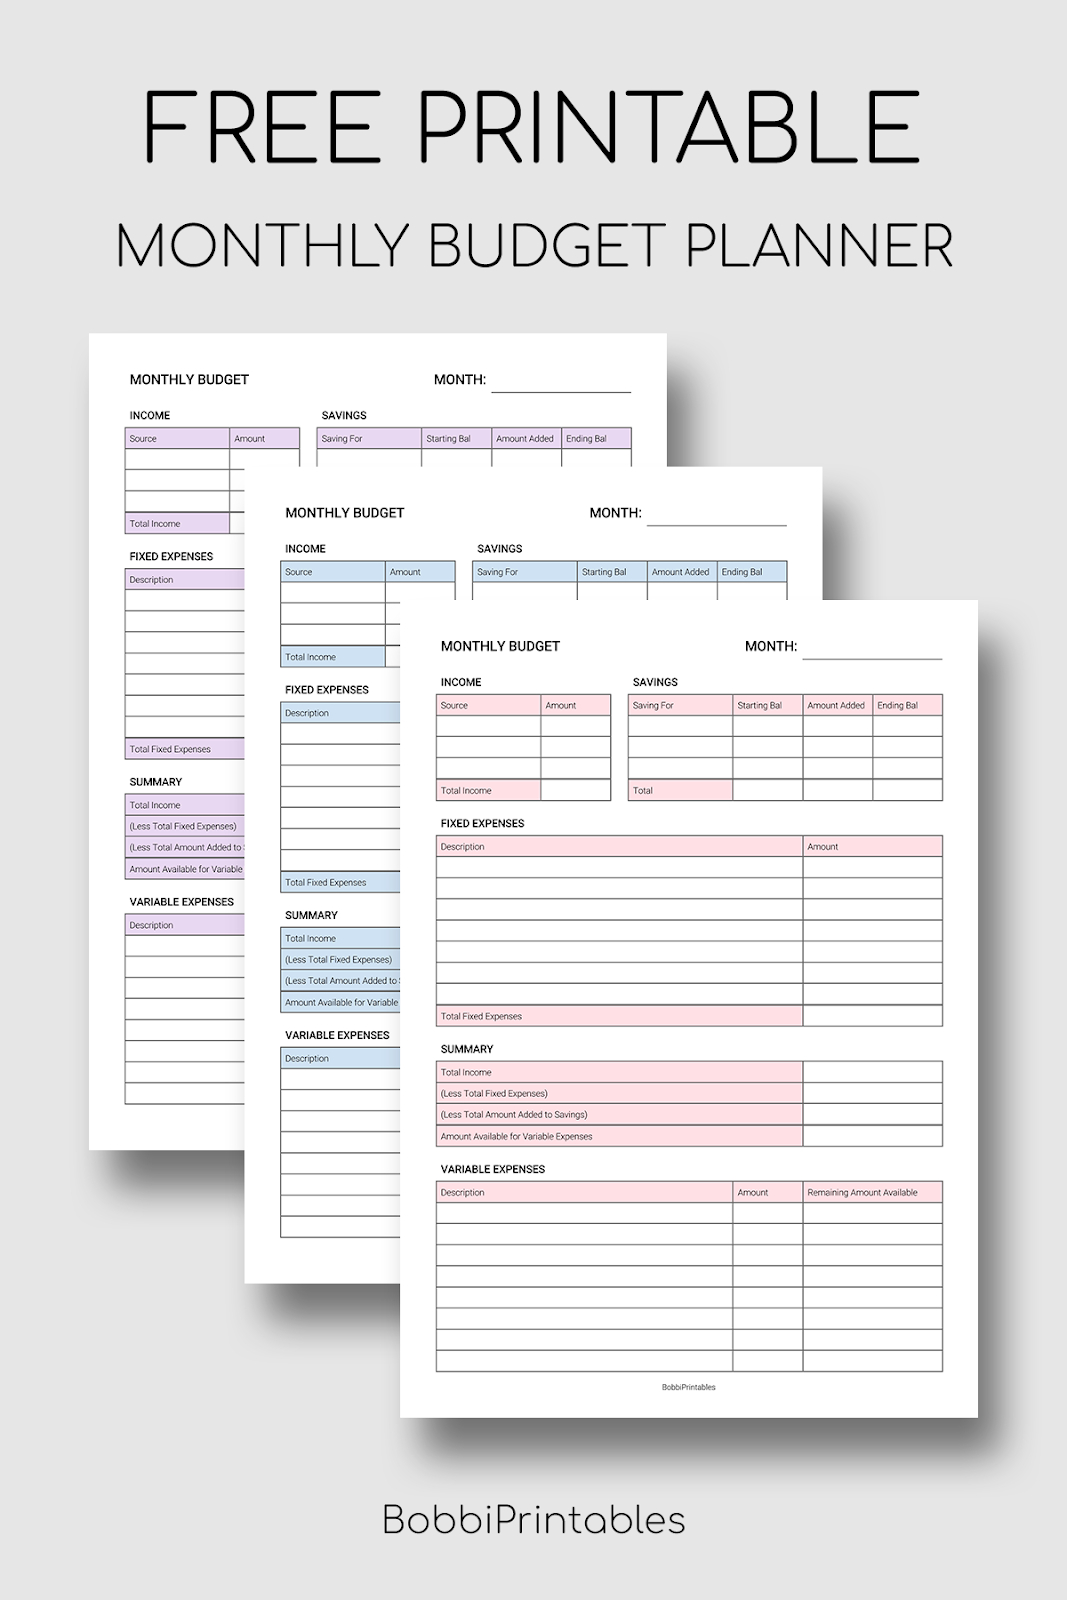 Printable Monthly Budget Planner throughout Fascinating Budget Planner Template Monthly